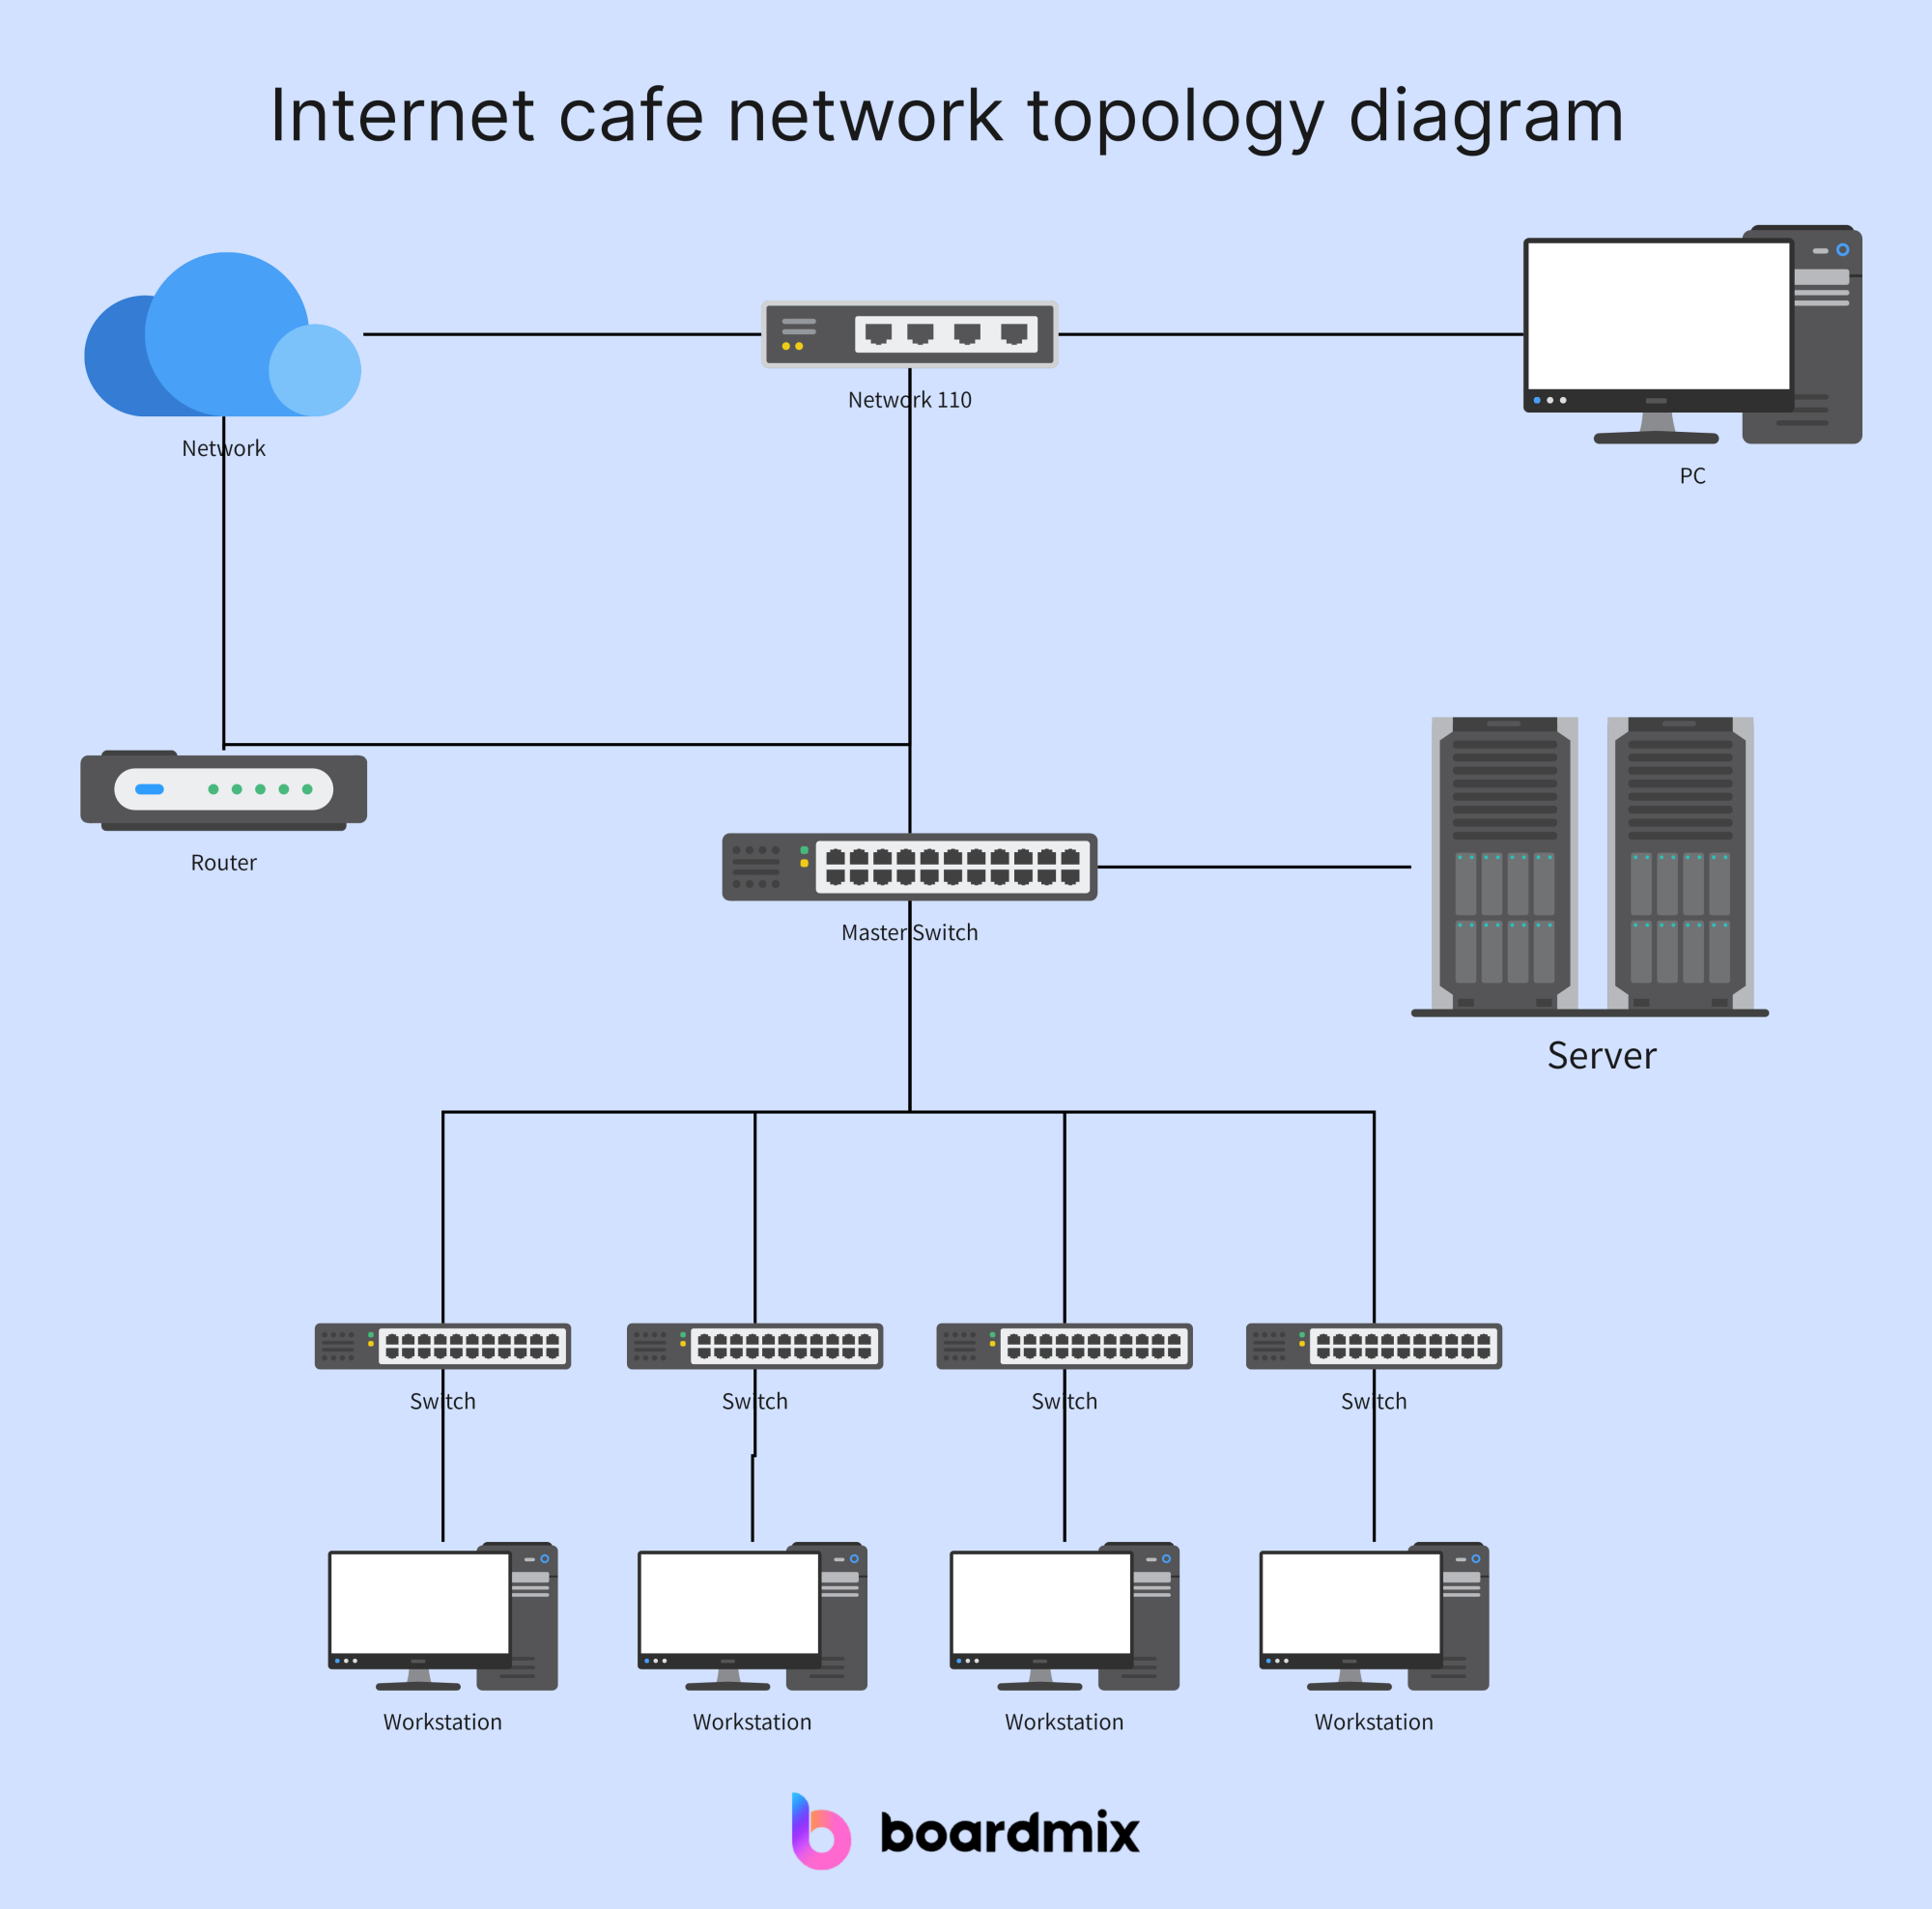 Boardmix: Make Your Bus Network Topology Diagrams Stand Out